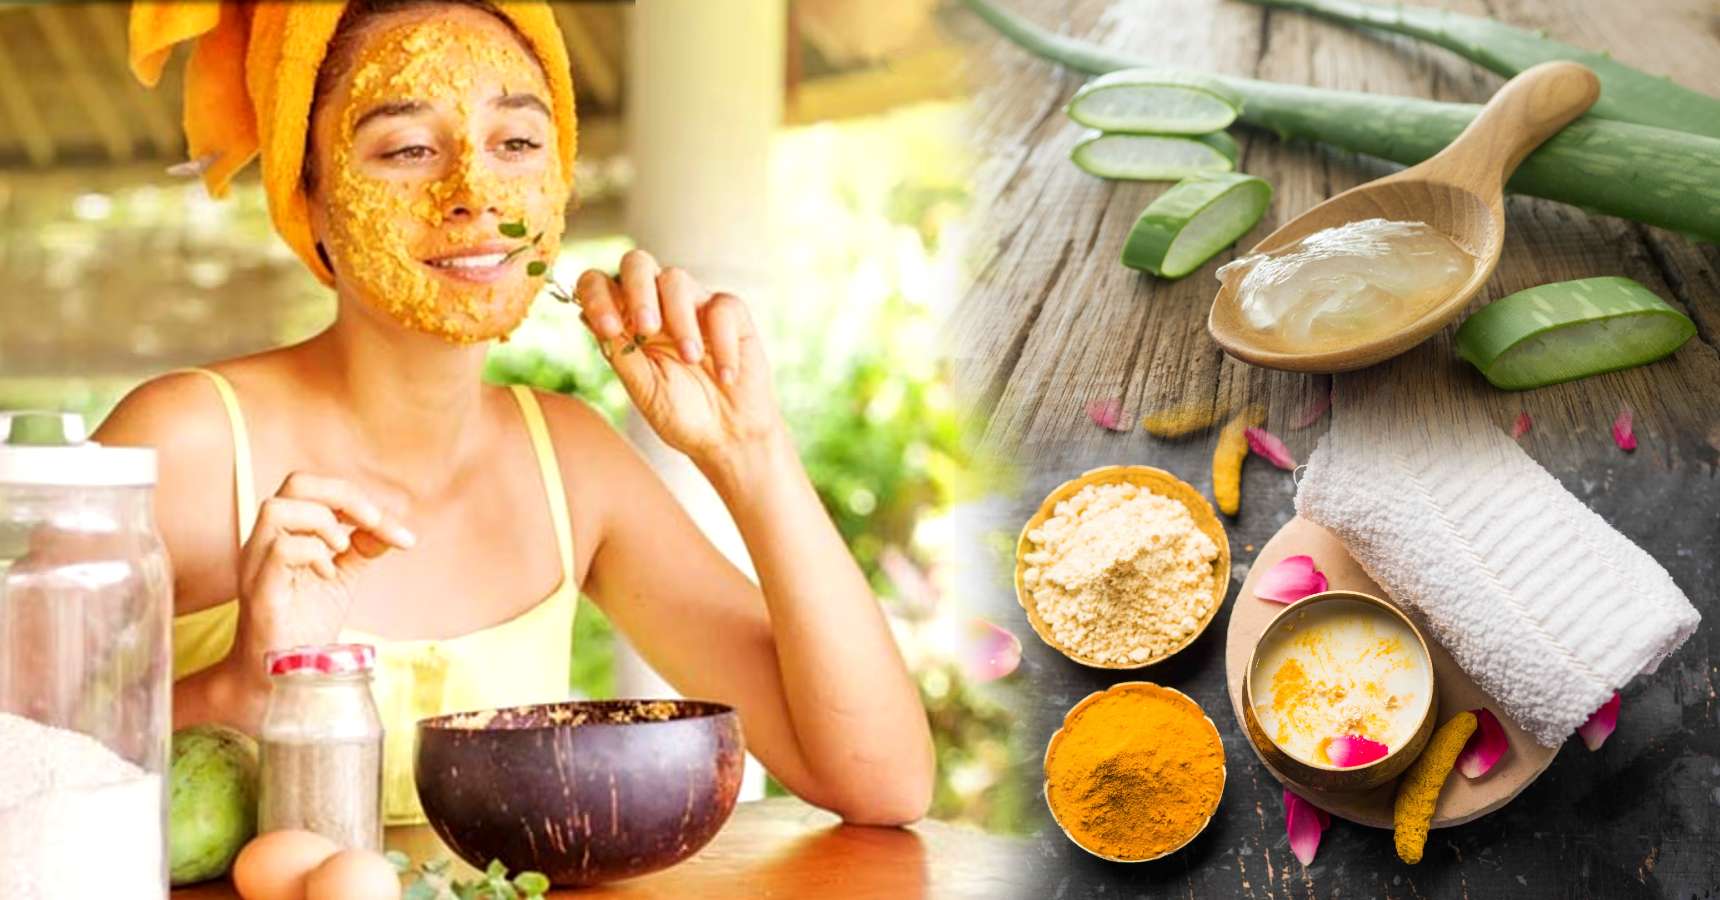 Dry Skin Care During Winter with Home Made Facepack made of Aloevera Turmeric etc